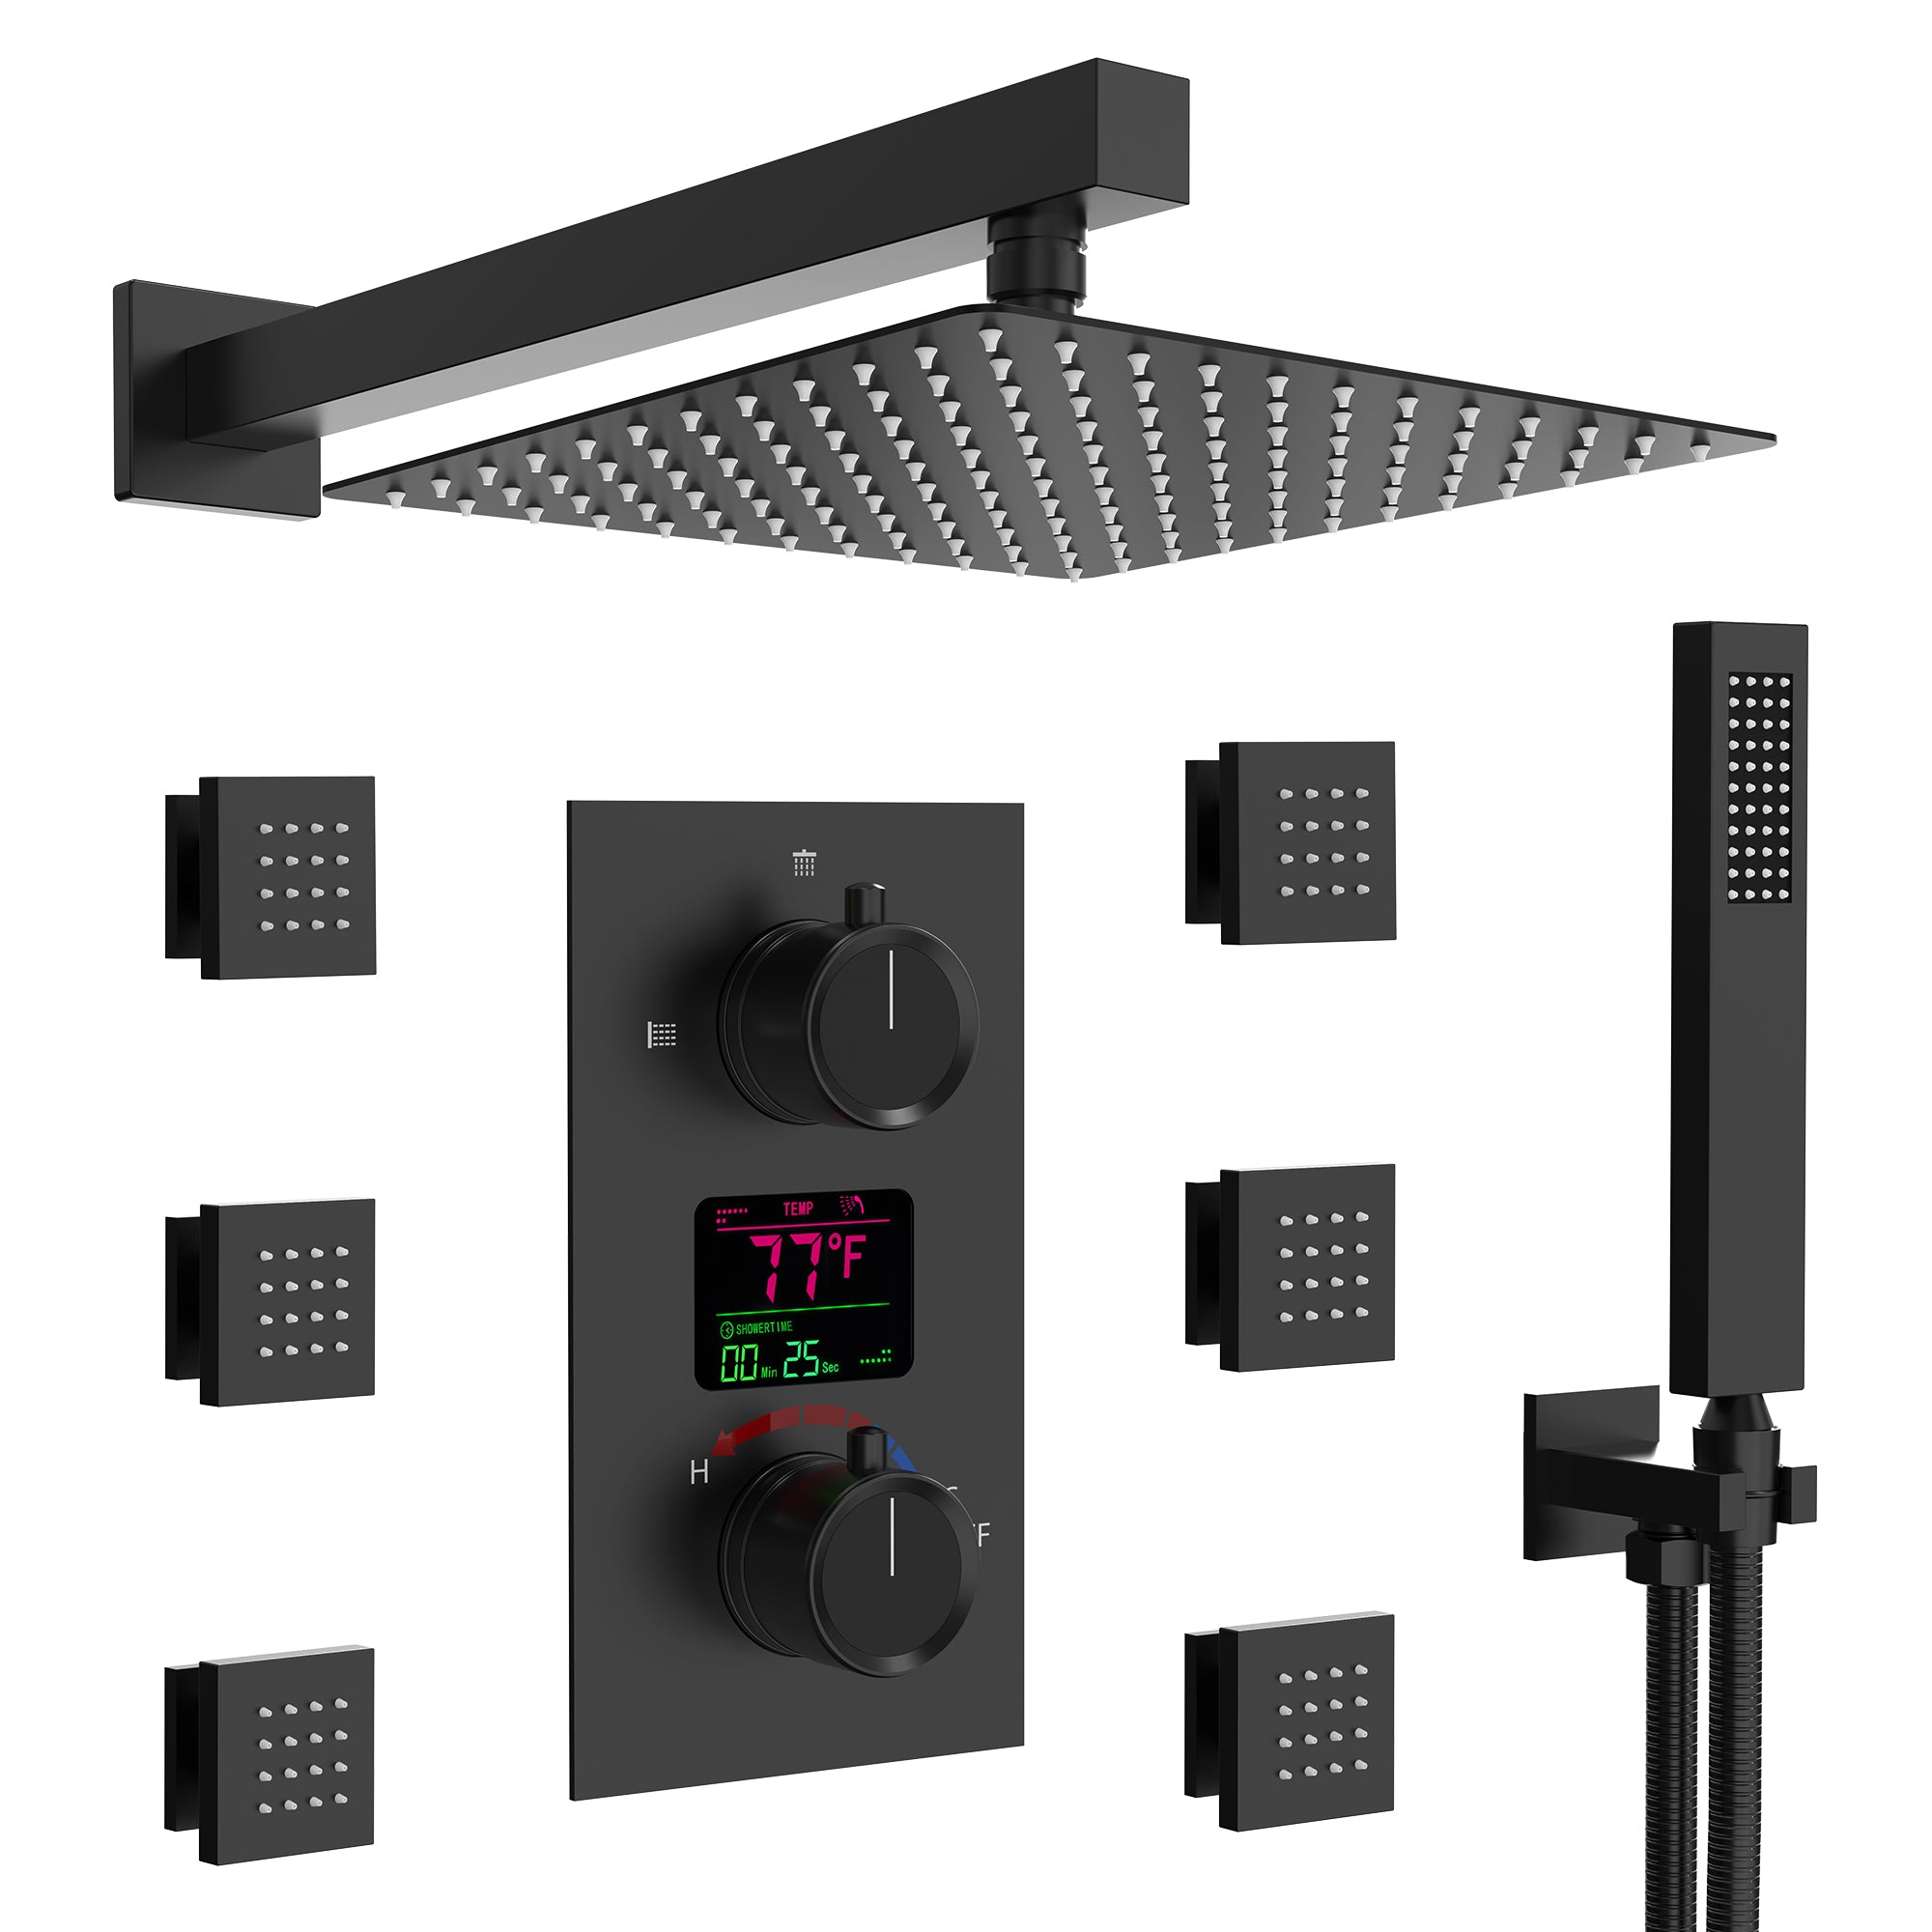 SFS-1014-BK12 EVERSTEIN Wall mounted constant temperature shower faucet with LED display rainwater shower system, equipped with 6 massage nozzles and hand-held spray